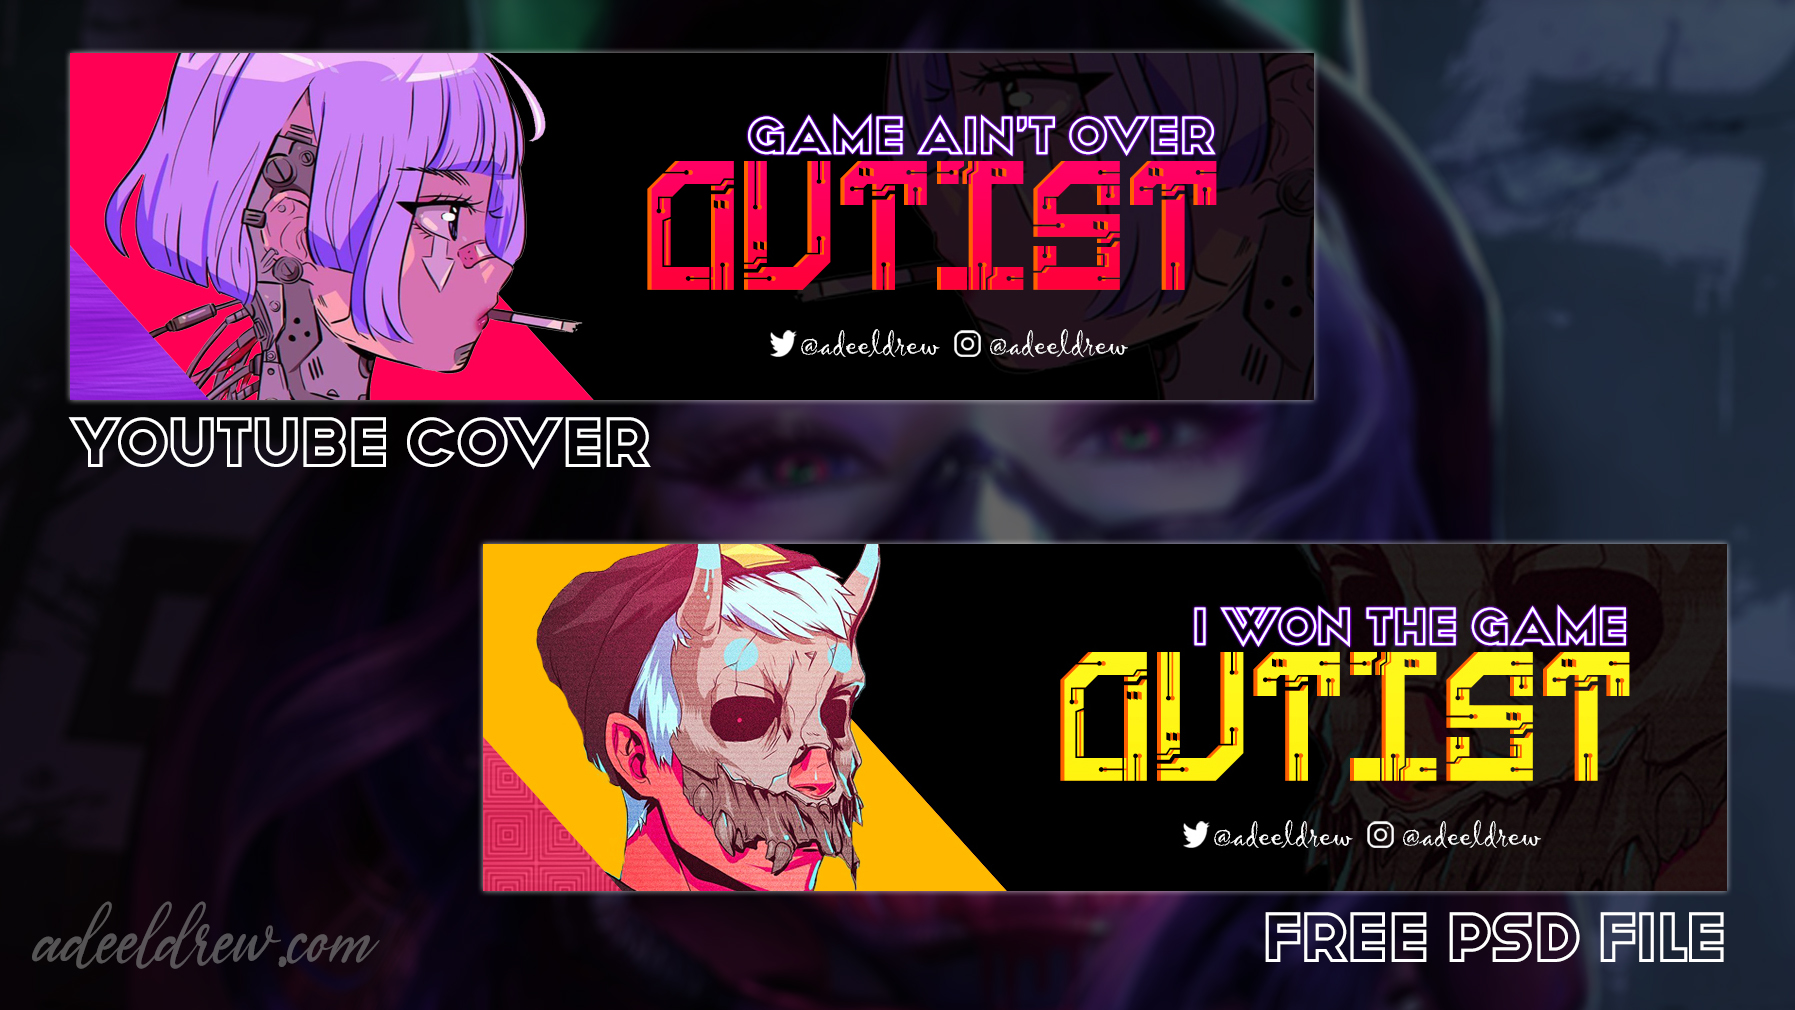 Outist Gaming Cover Banner Art For Youtube Free Psd Download Youtube Gaming Banner Art For Boys And Girls